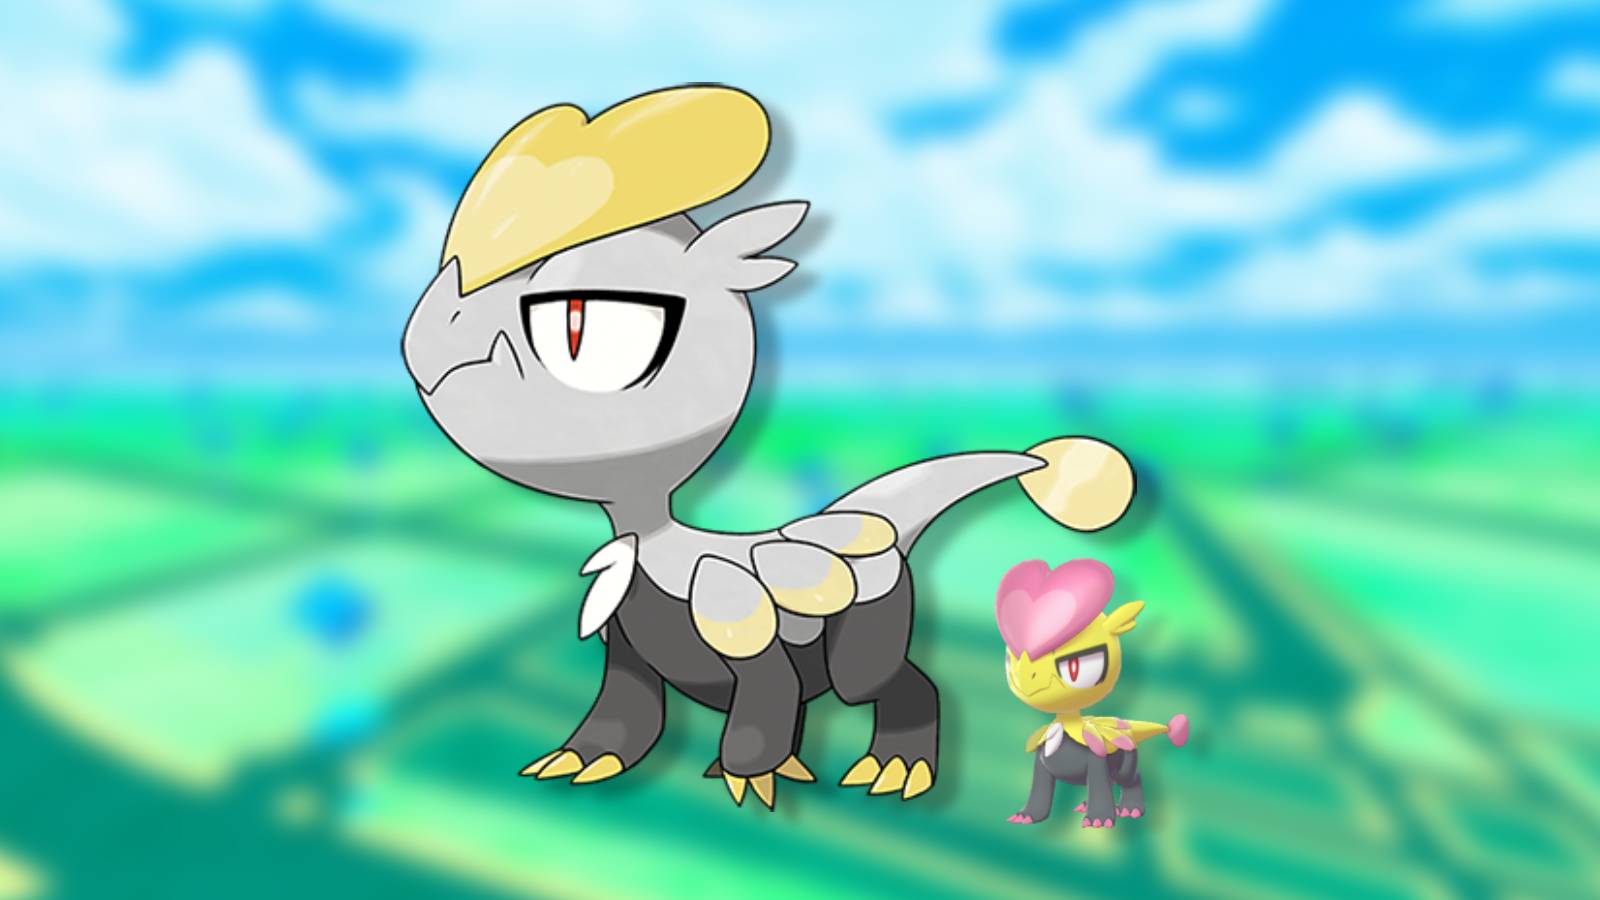 The Pokemon Jangmo-o and a shiny version are shown against a blurred background